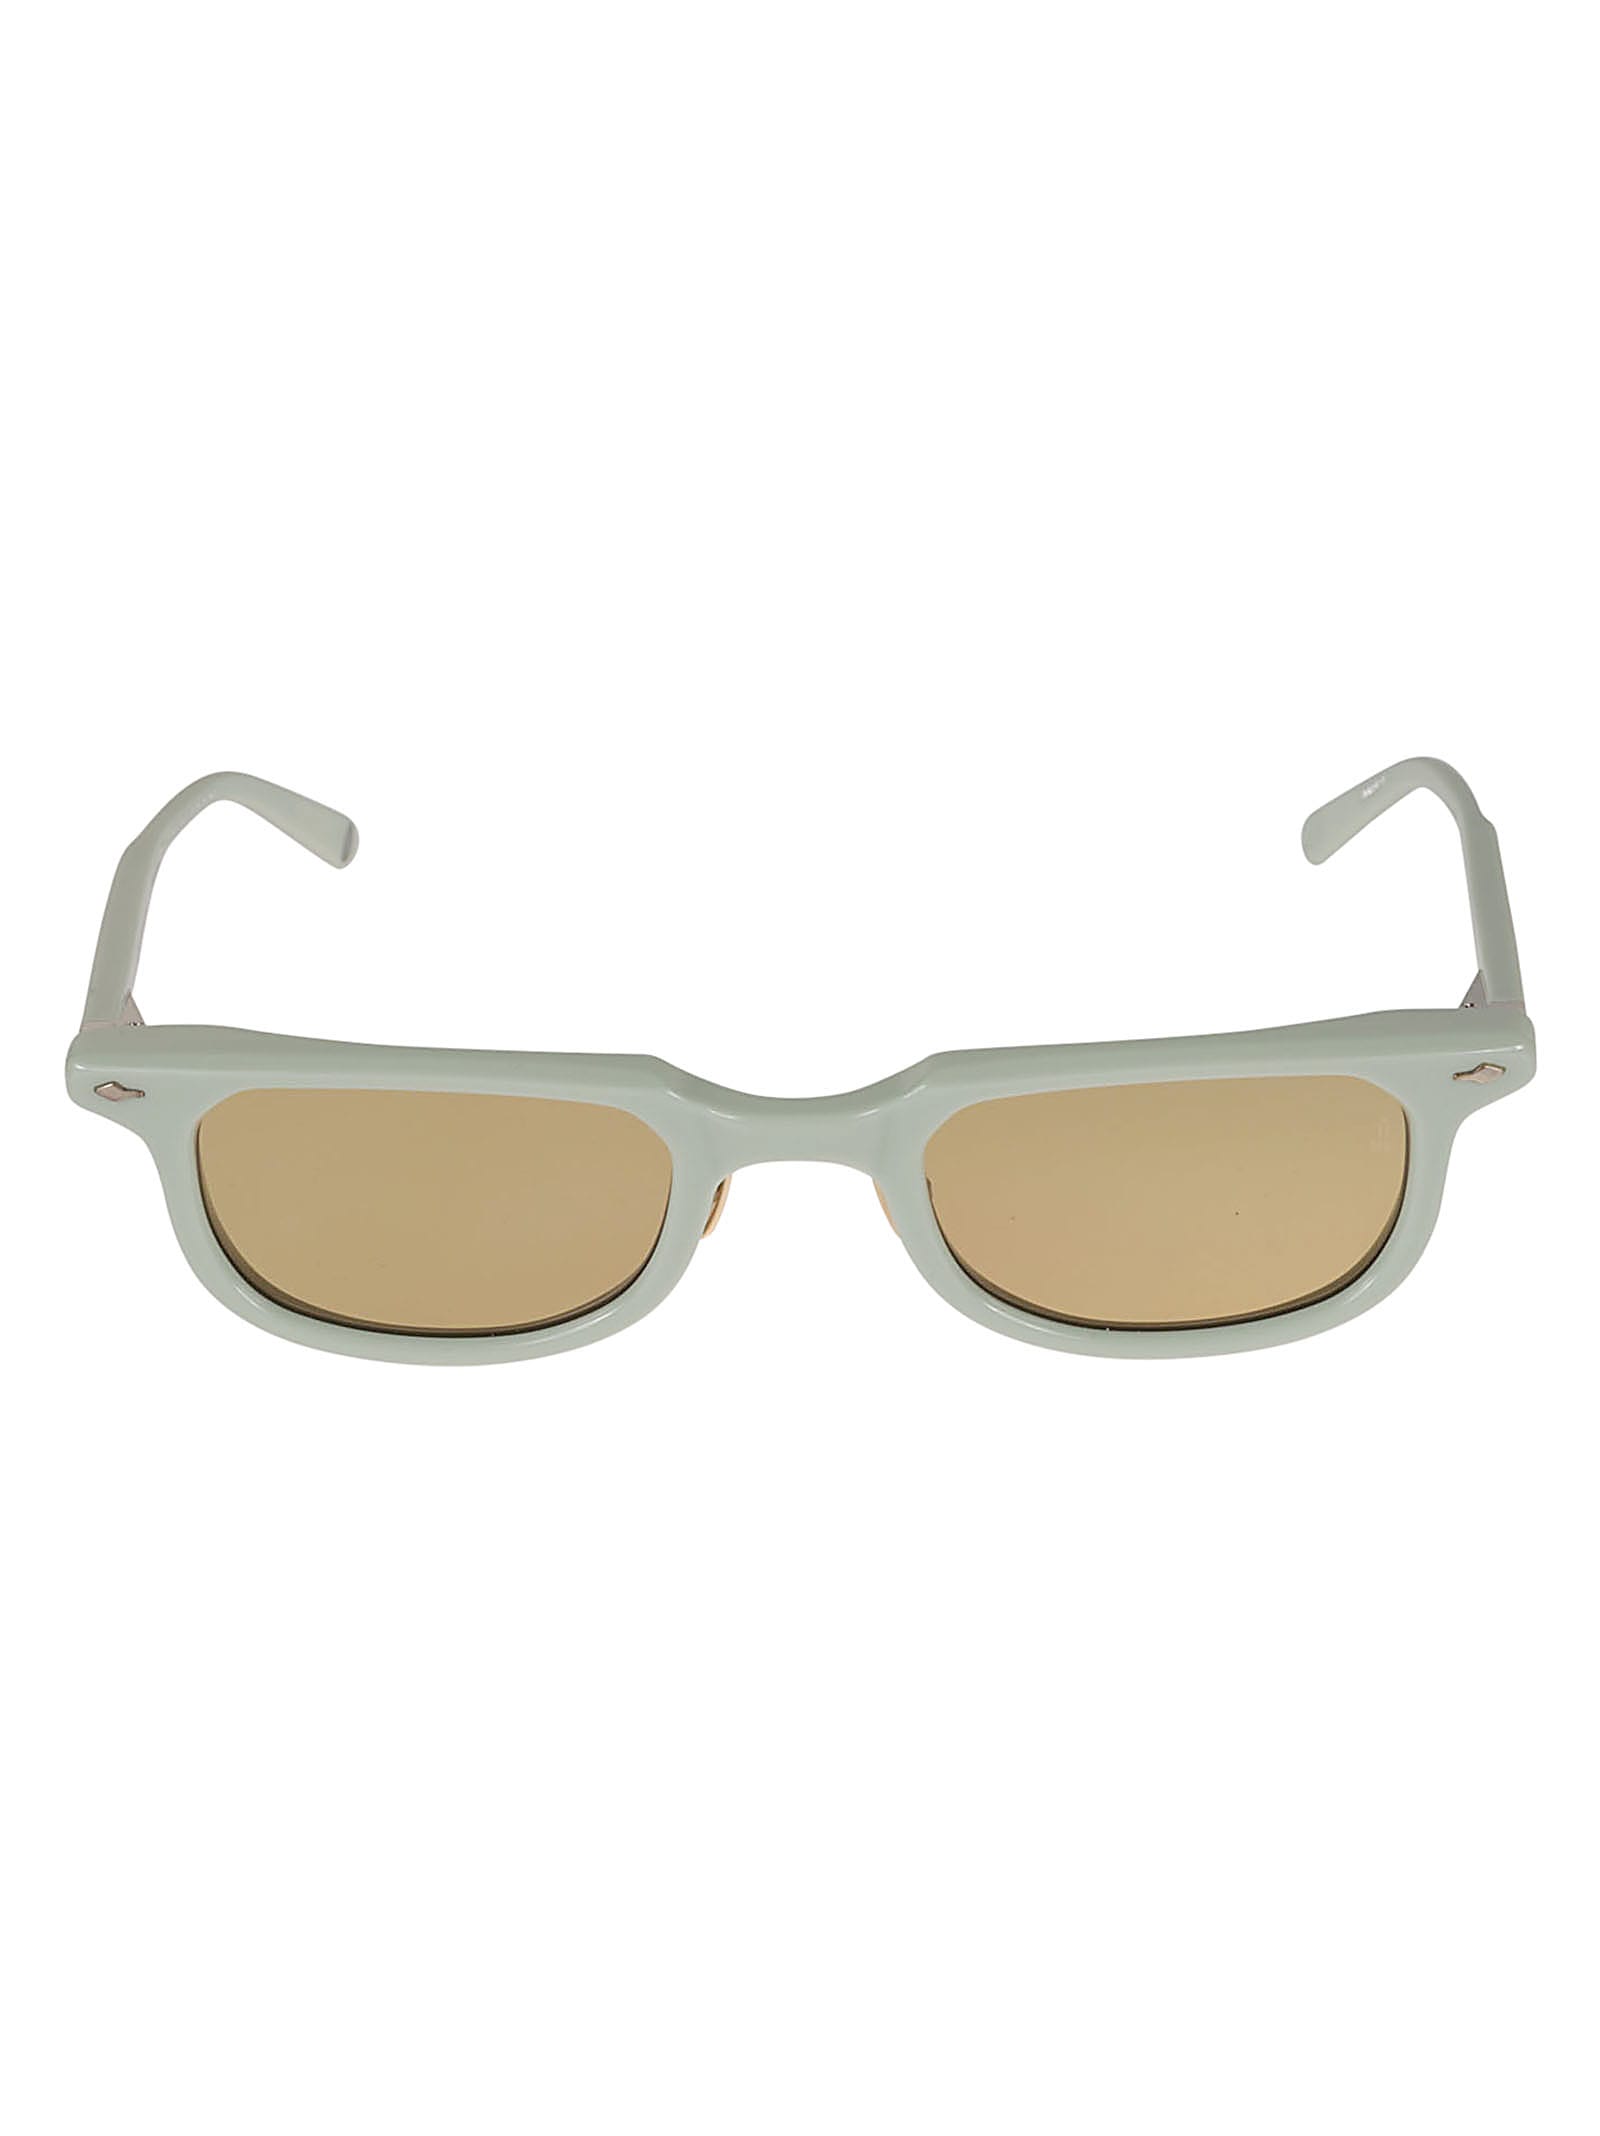 JACQUES MARIE MAGE RECTANGLE LONG SUNGLASSES